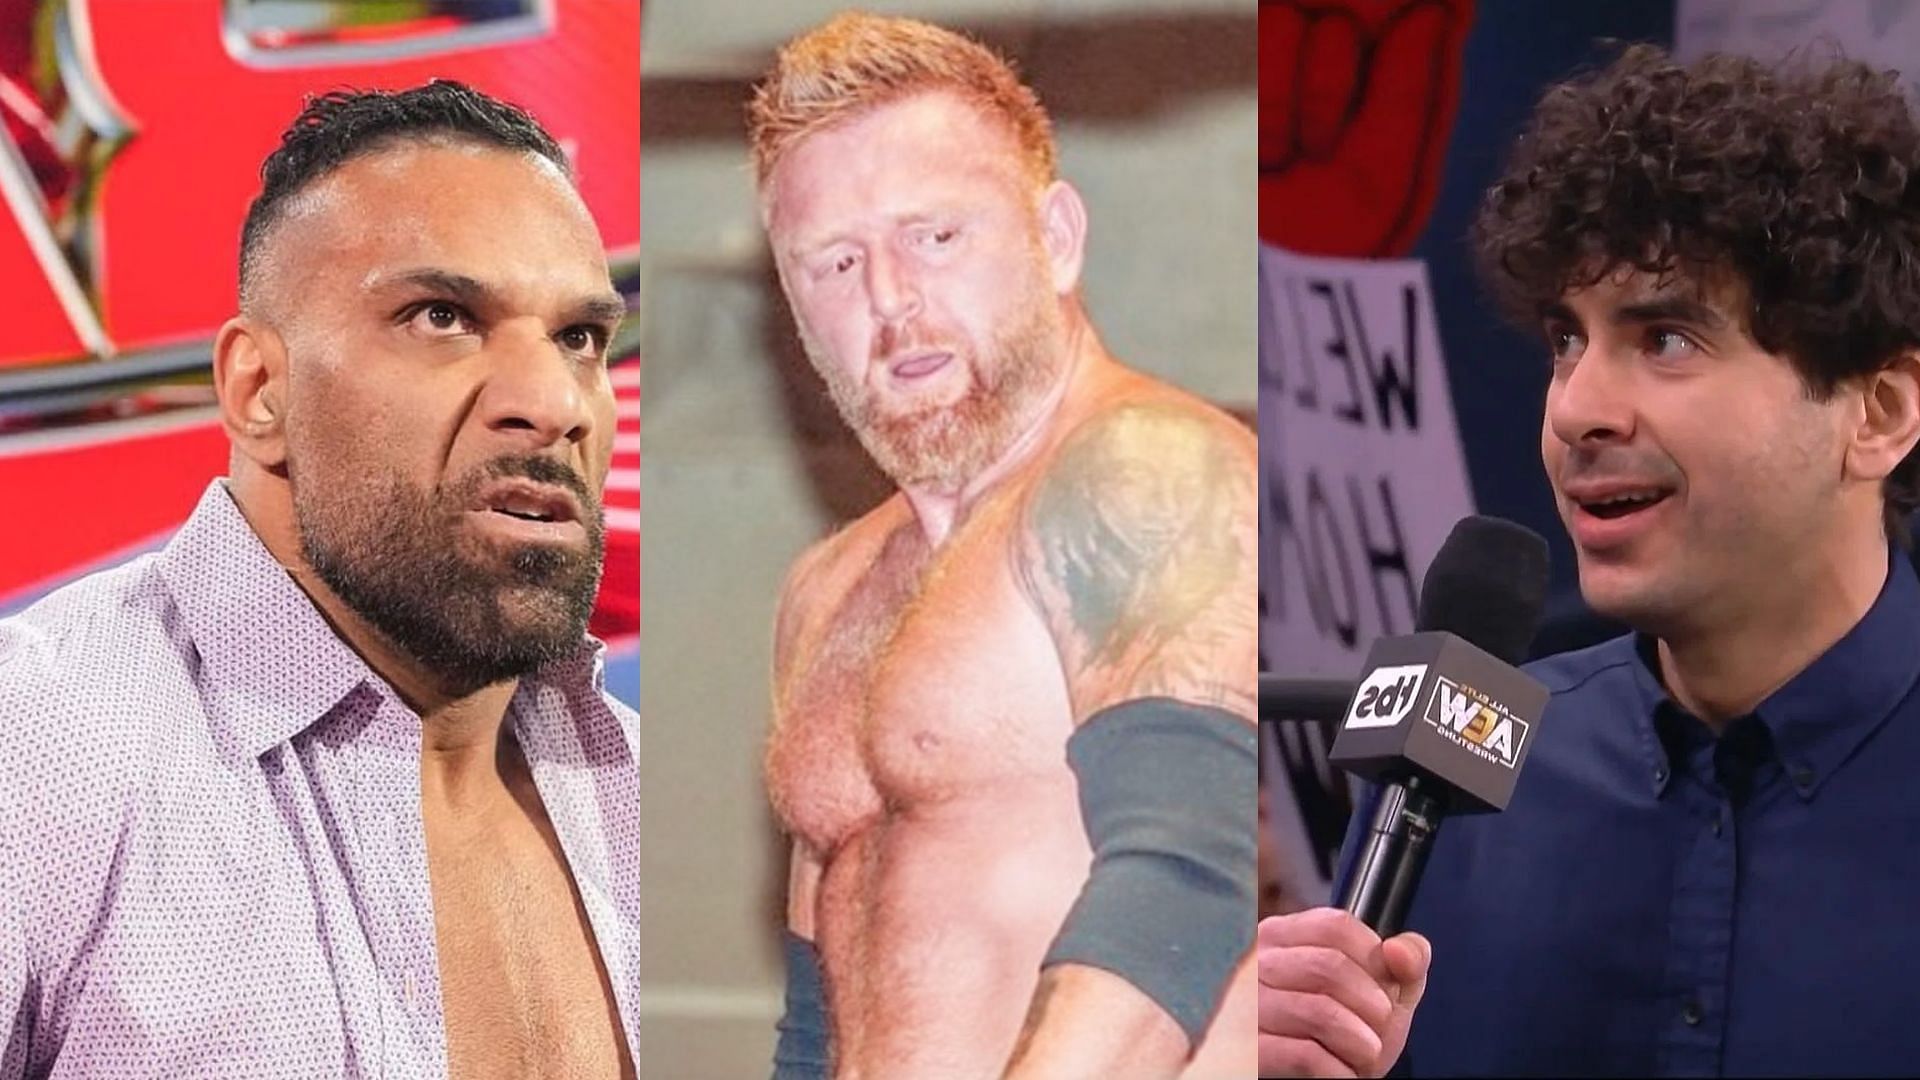 Heath and Jinder Mahal were a part of the 3MB faction in WWE